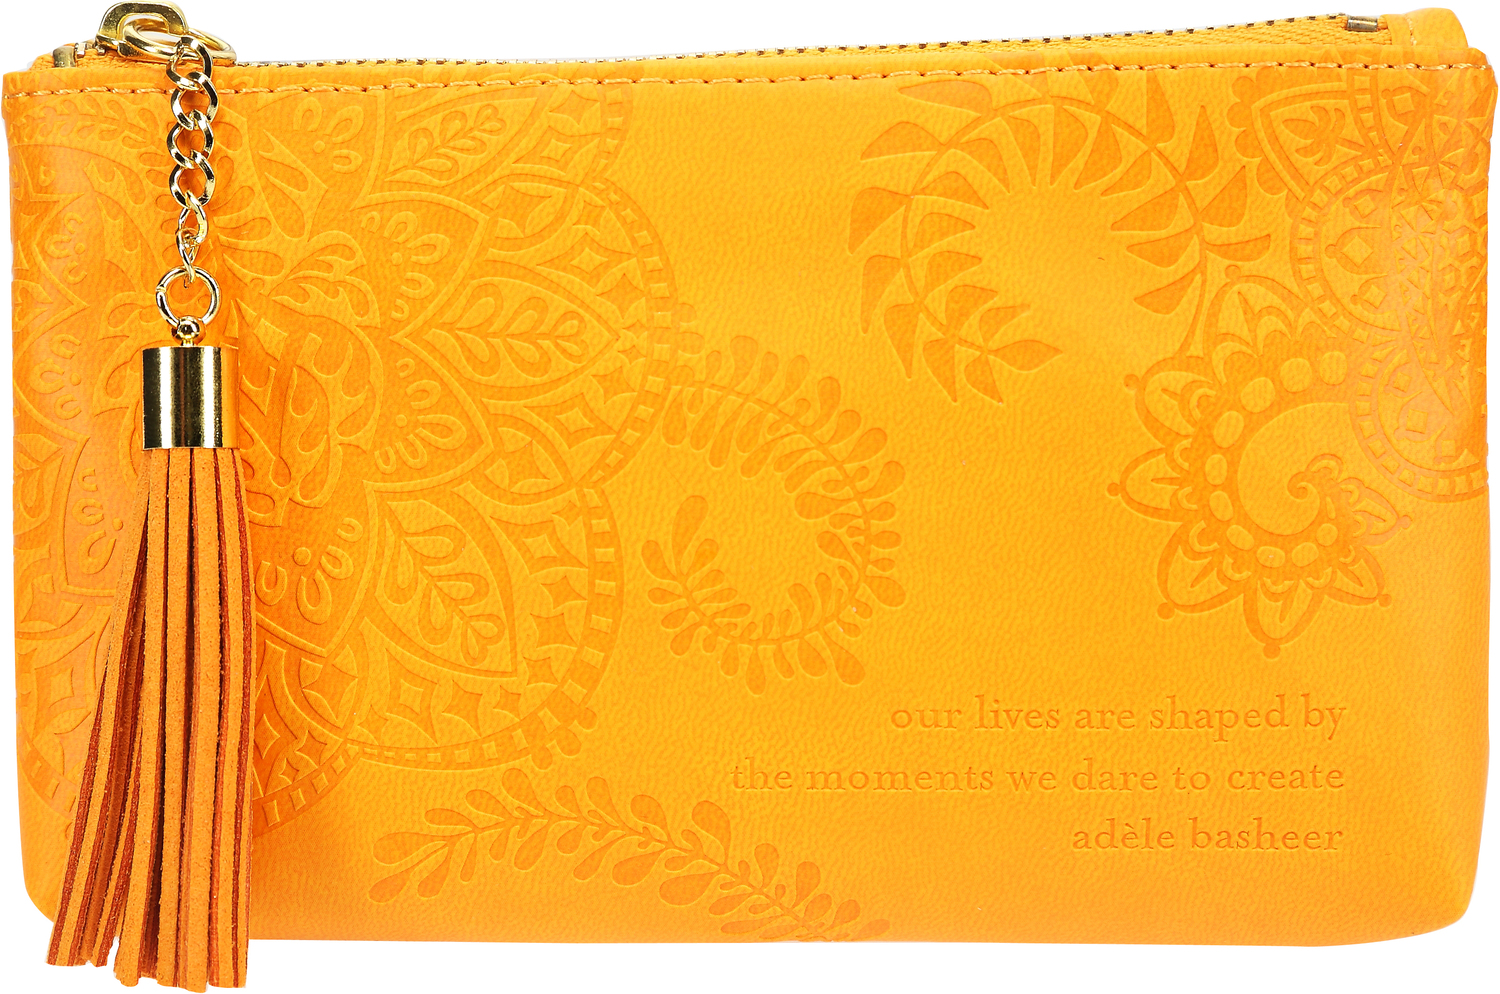 Marigold by Intrinsic - Marigold - Gift Boxed Vegan Leather Coin Purse